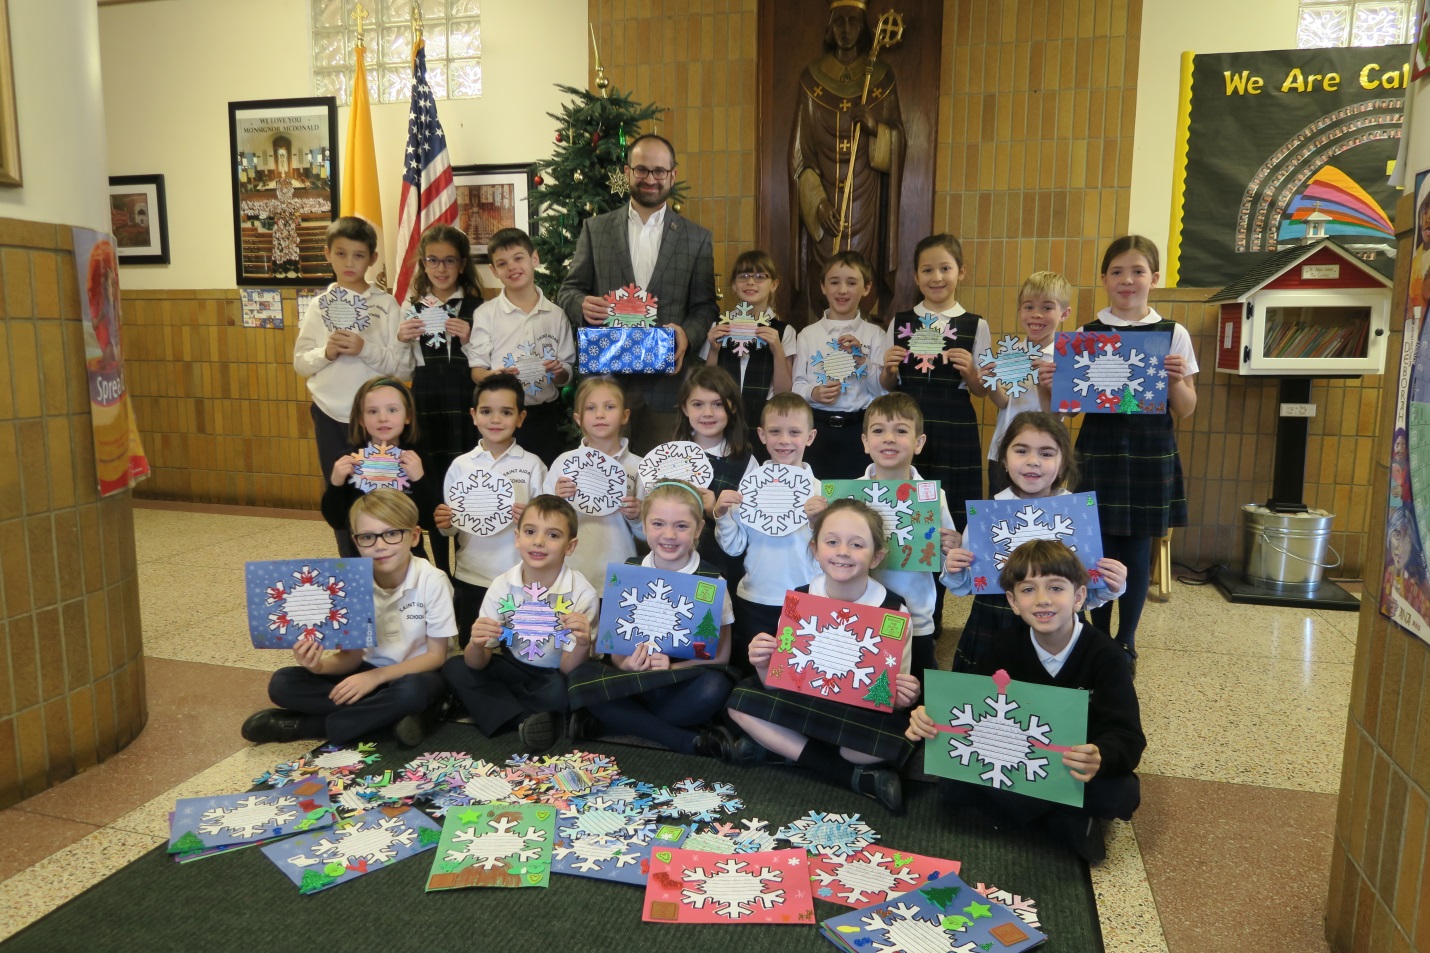 Assemblyman Ed Ra (R-Franklin Square) with students from St. Aidan’s lower school who participated in his annual Snowflakes for Seniors program to spread holiday cheer to local senior citizens.